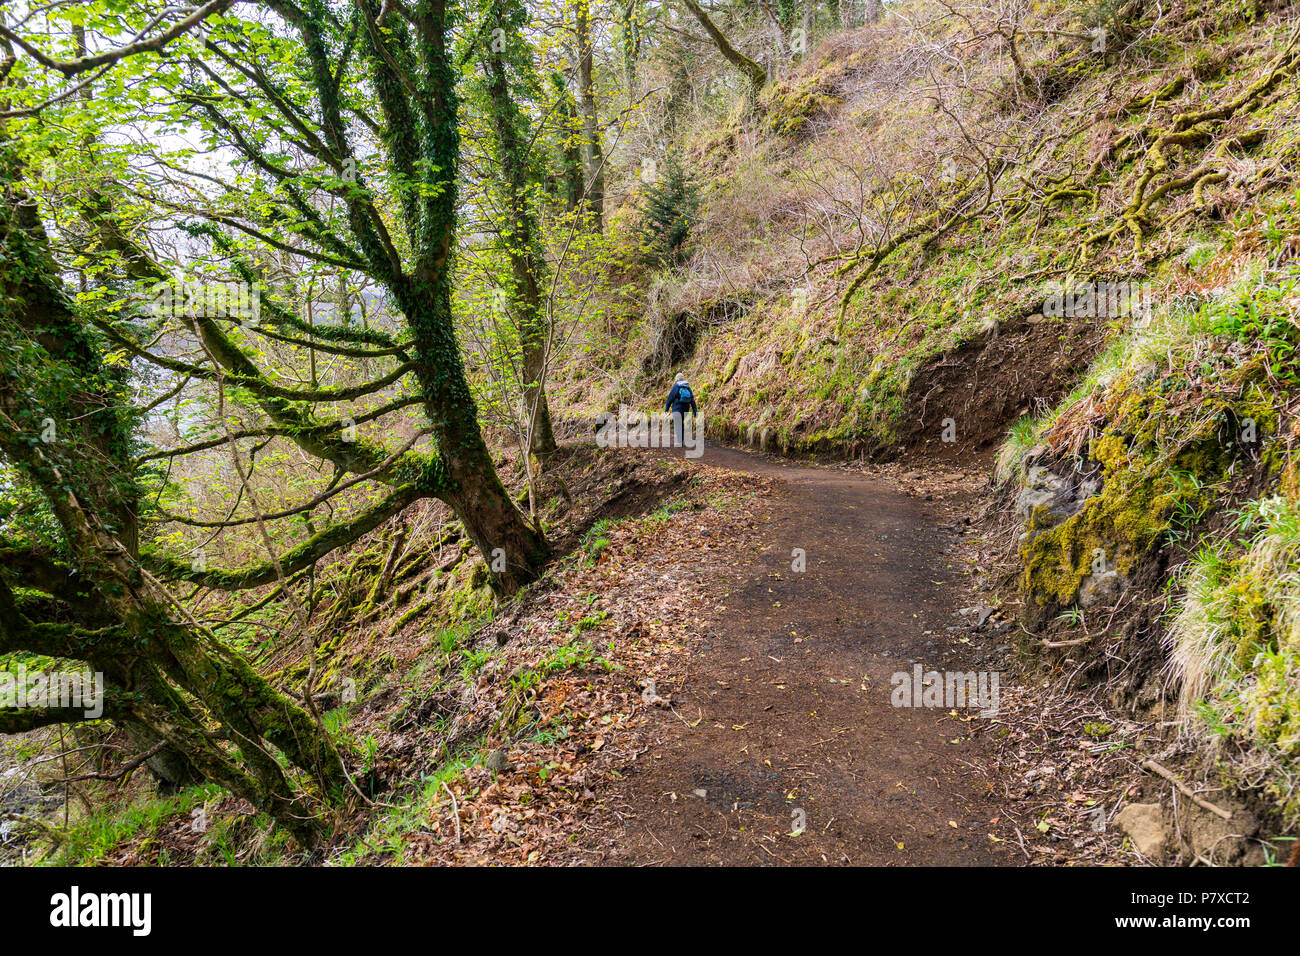 A walker on the ancient woodland cliffside walk between Tobermory and Rubha nan Gall lighthouse, Isle of Mull, Argyll and Bute, Scotland, UK Stock Photo